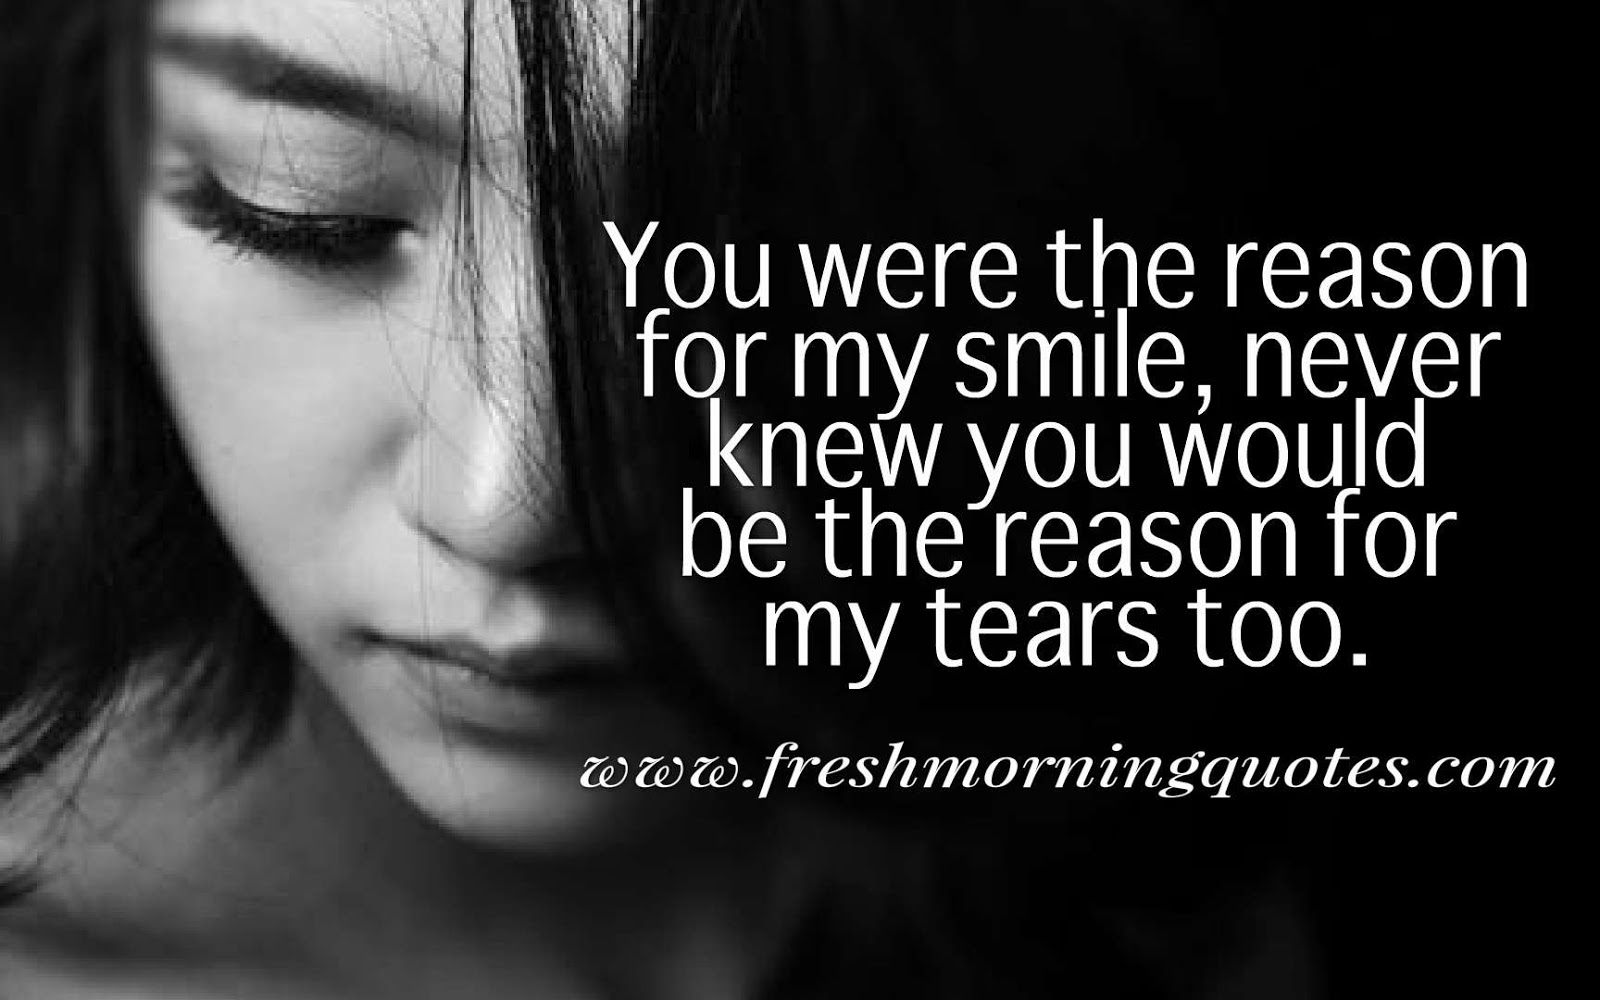 100+ Sad Love Quotes That Will Make You cry